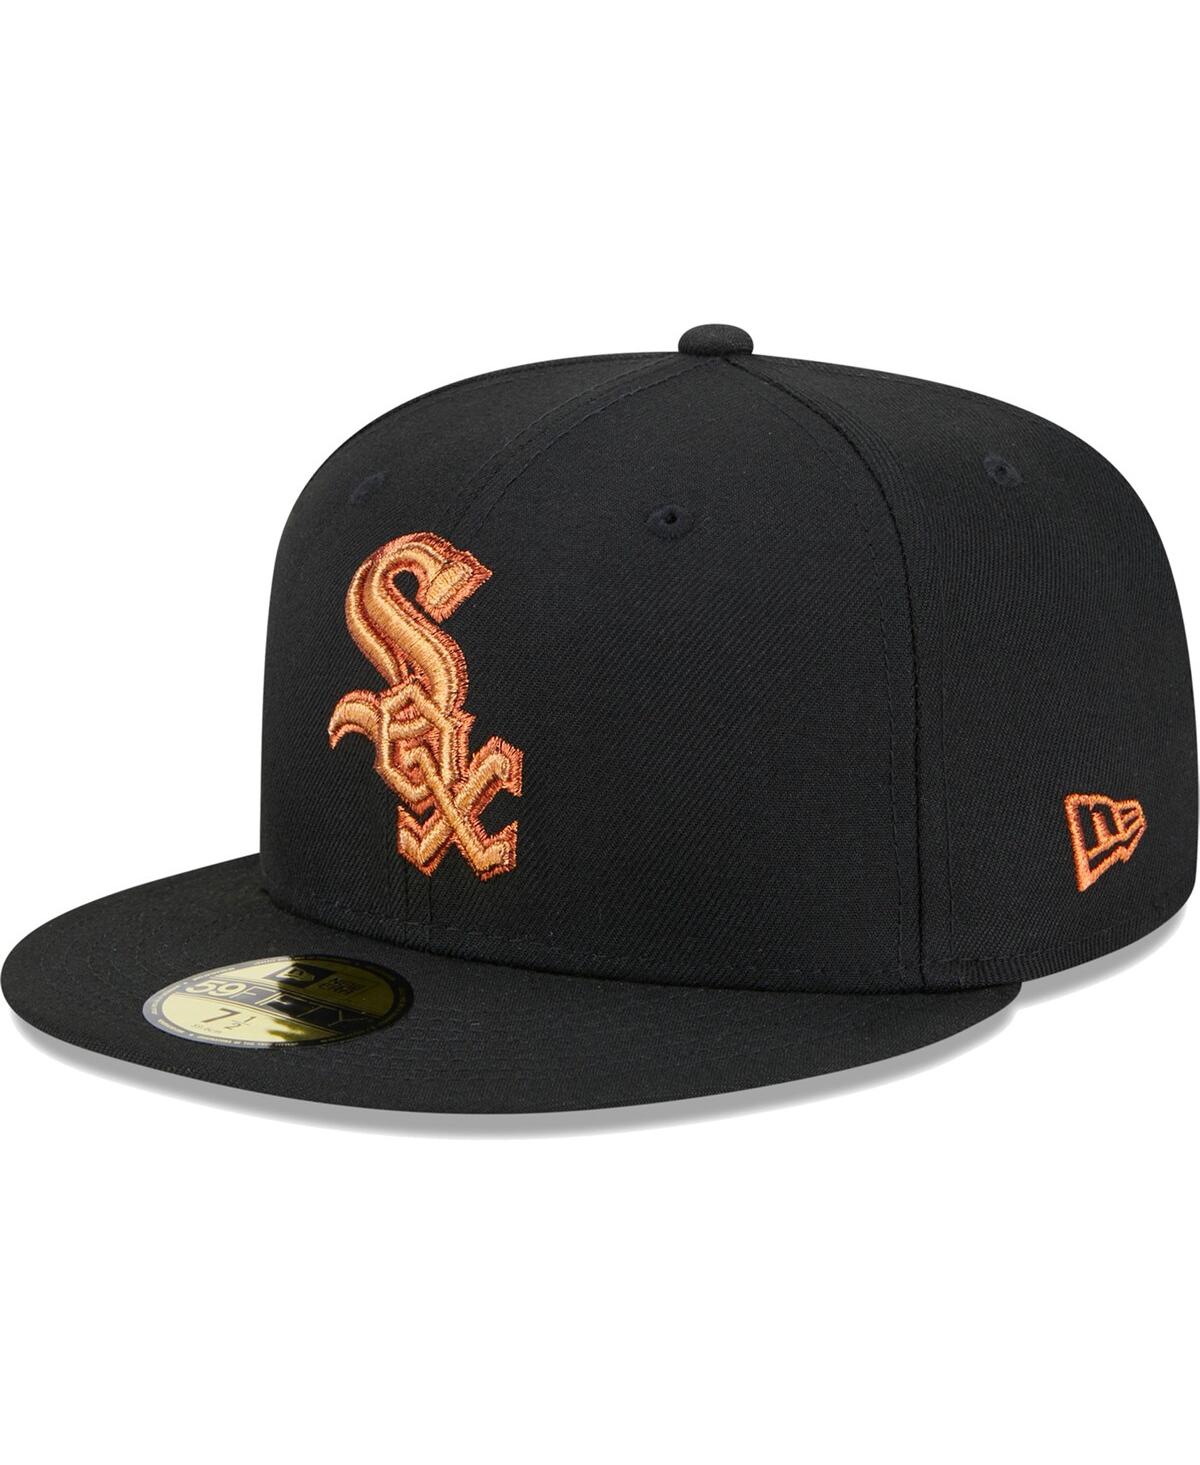 Shop New Era Men's  Black Chicago White Sox Metallic Pop 59fifty Fitted Hat